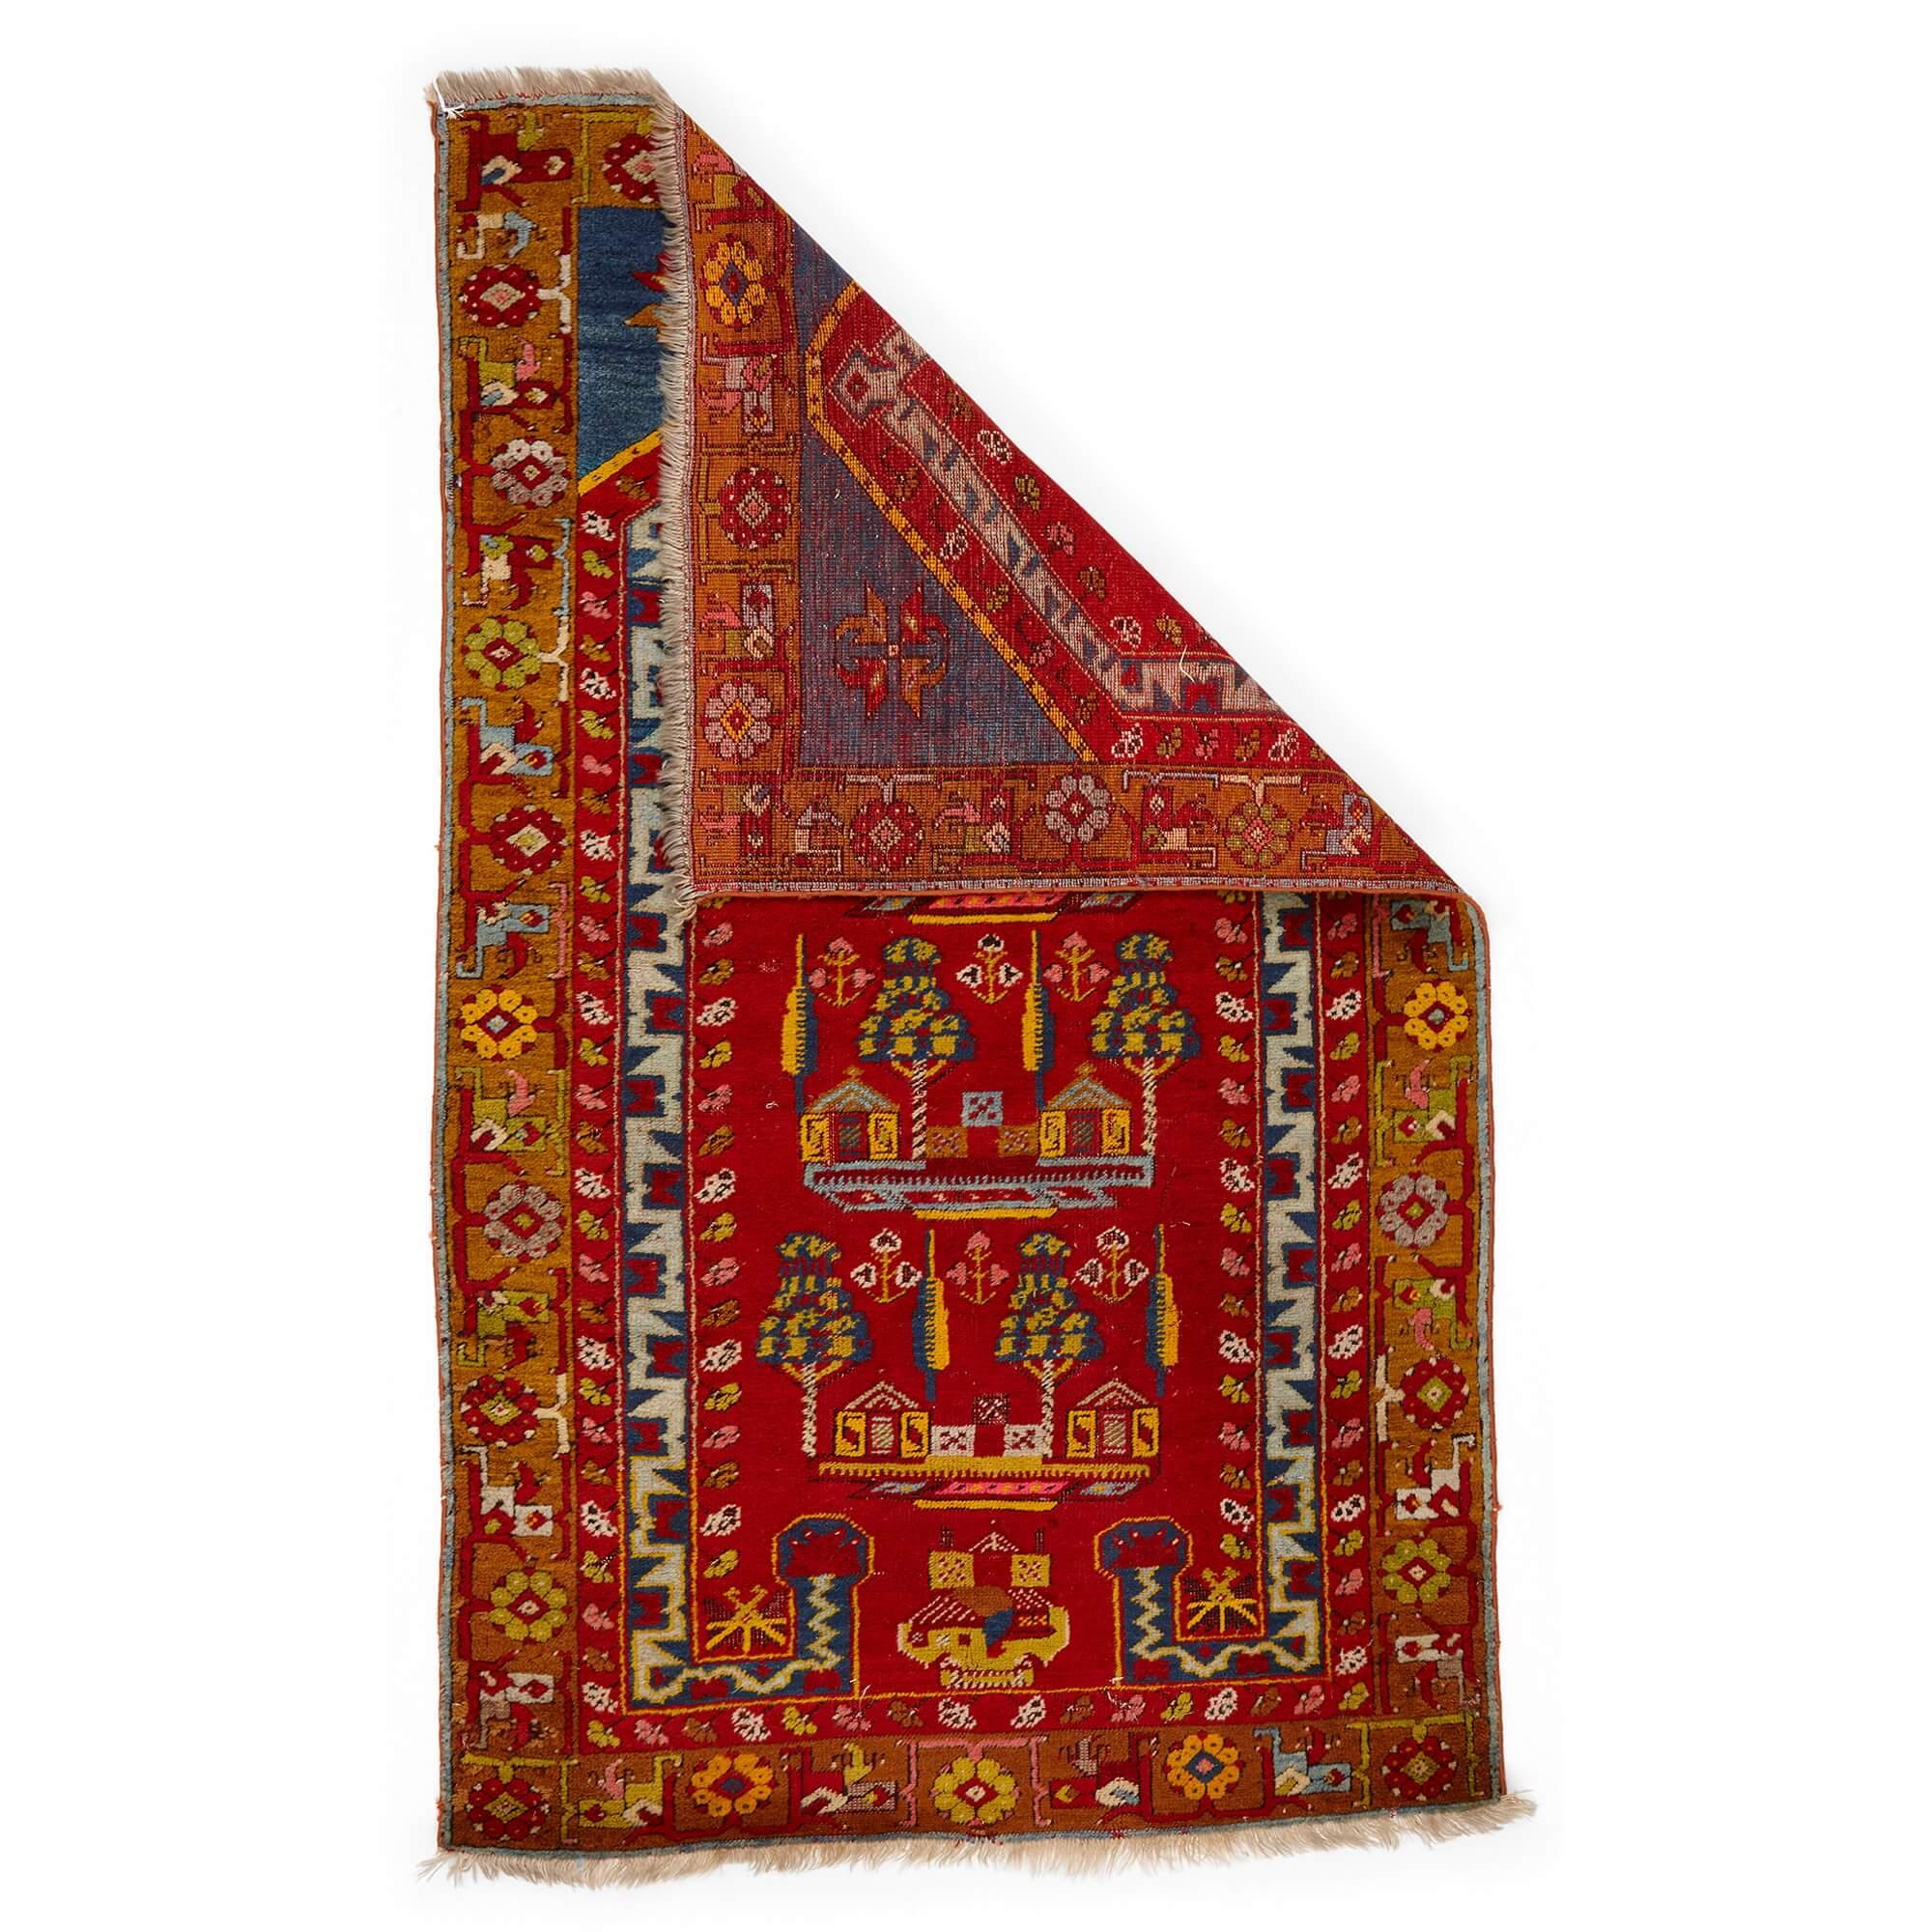 Anatolian Kirsehir prayer rug with a village design 
Turkish, 20th Century 
Height 155cm, width 96cm

This eye-catching pictorial prayer rug was skilfully woven from wool by Turkish carpet weavers in the 20th century. Its design is typical of rugs